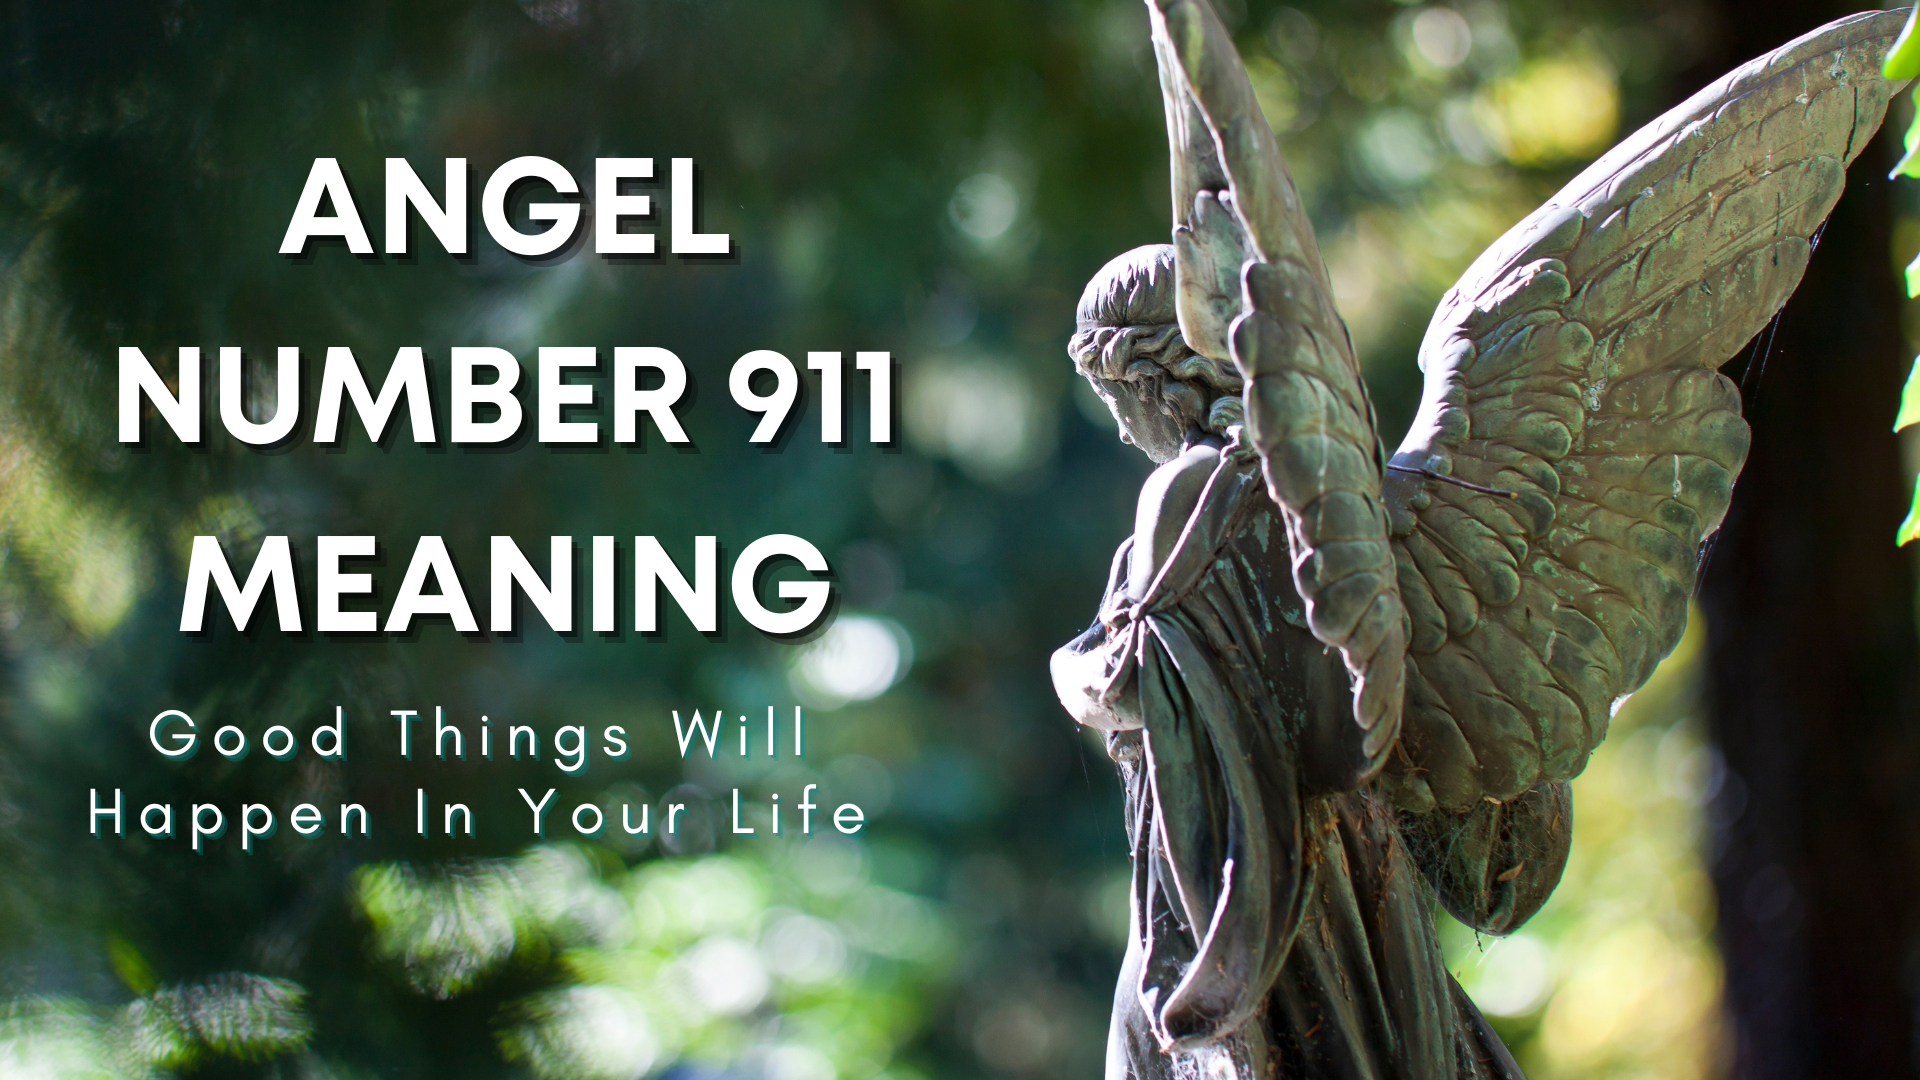 Angel Number 911 Meaning - Good Things Will Happen In Your Life